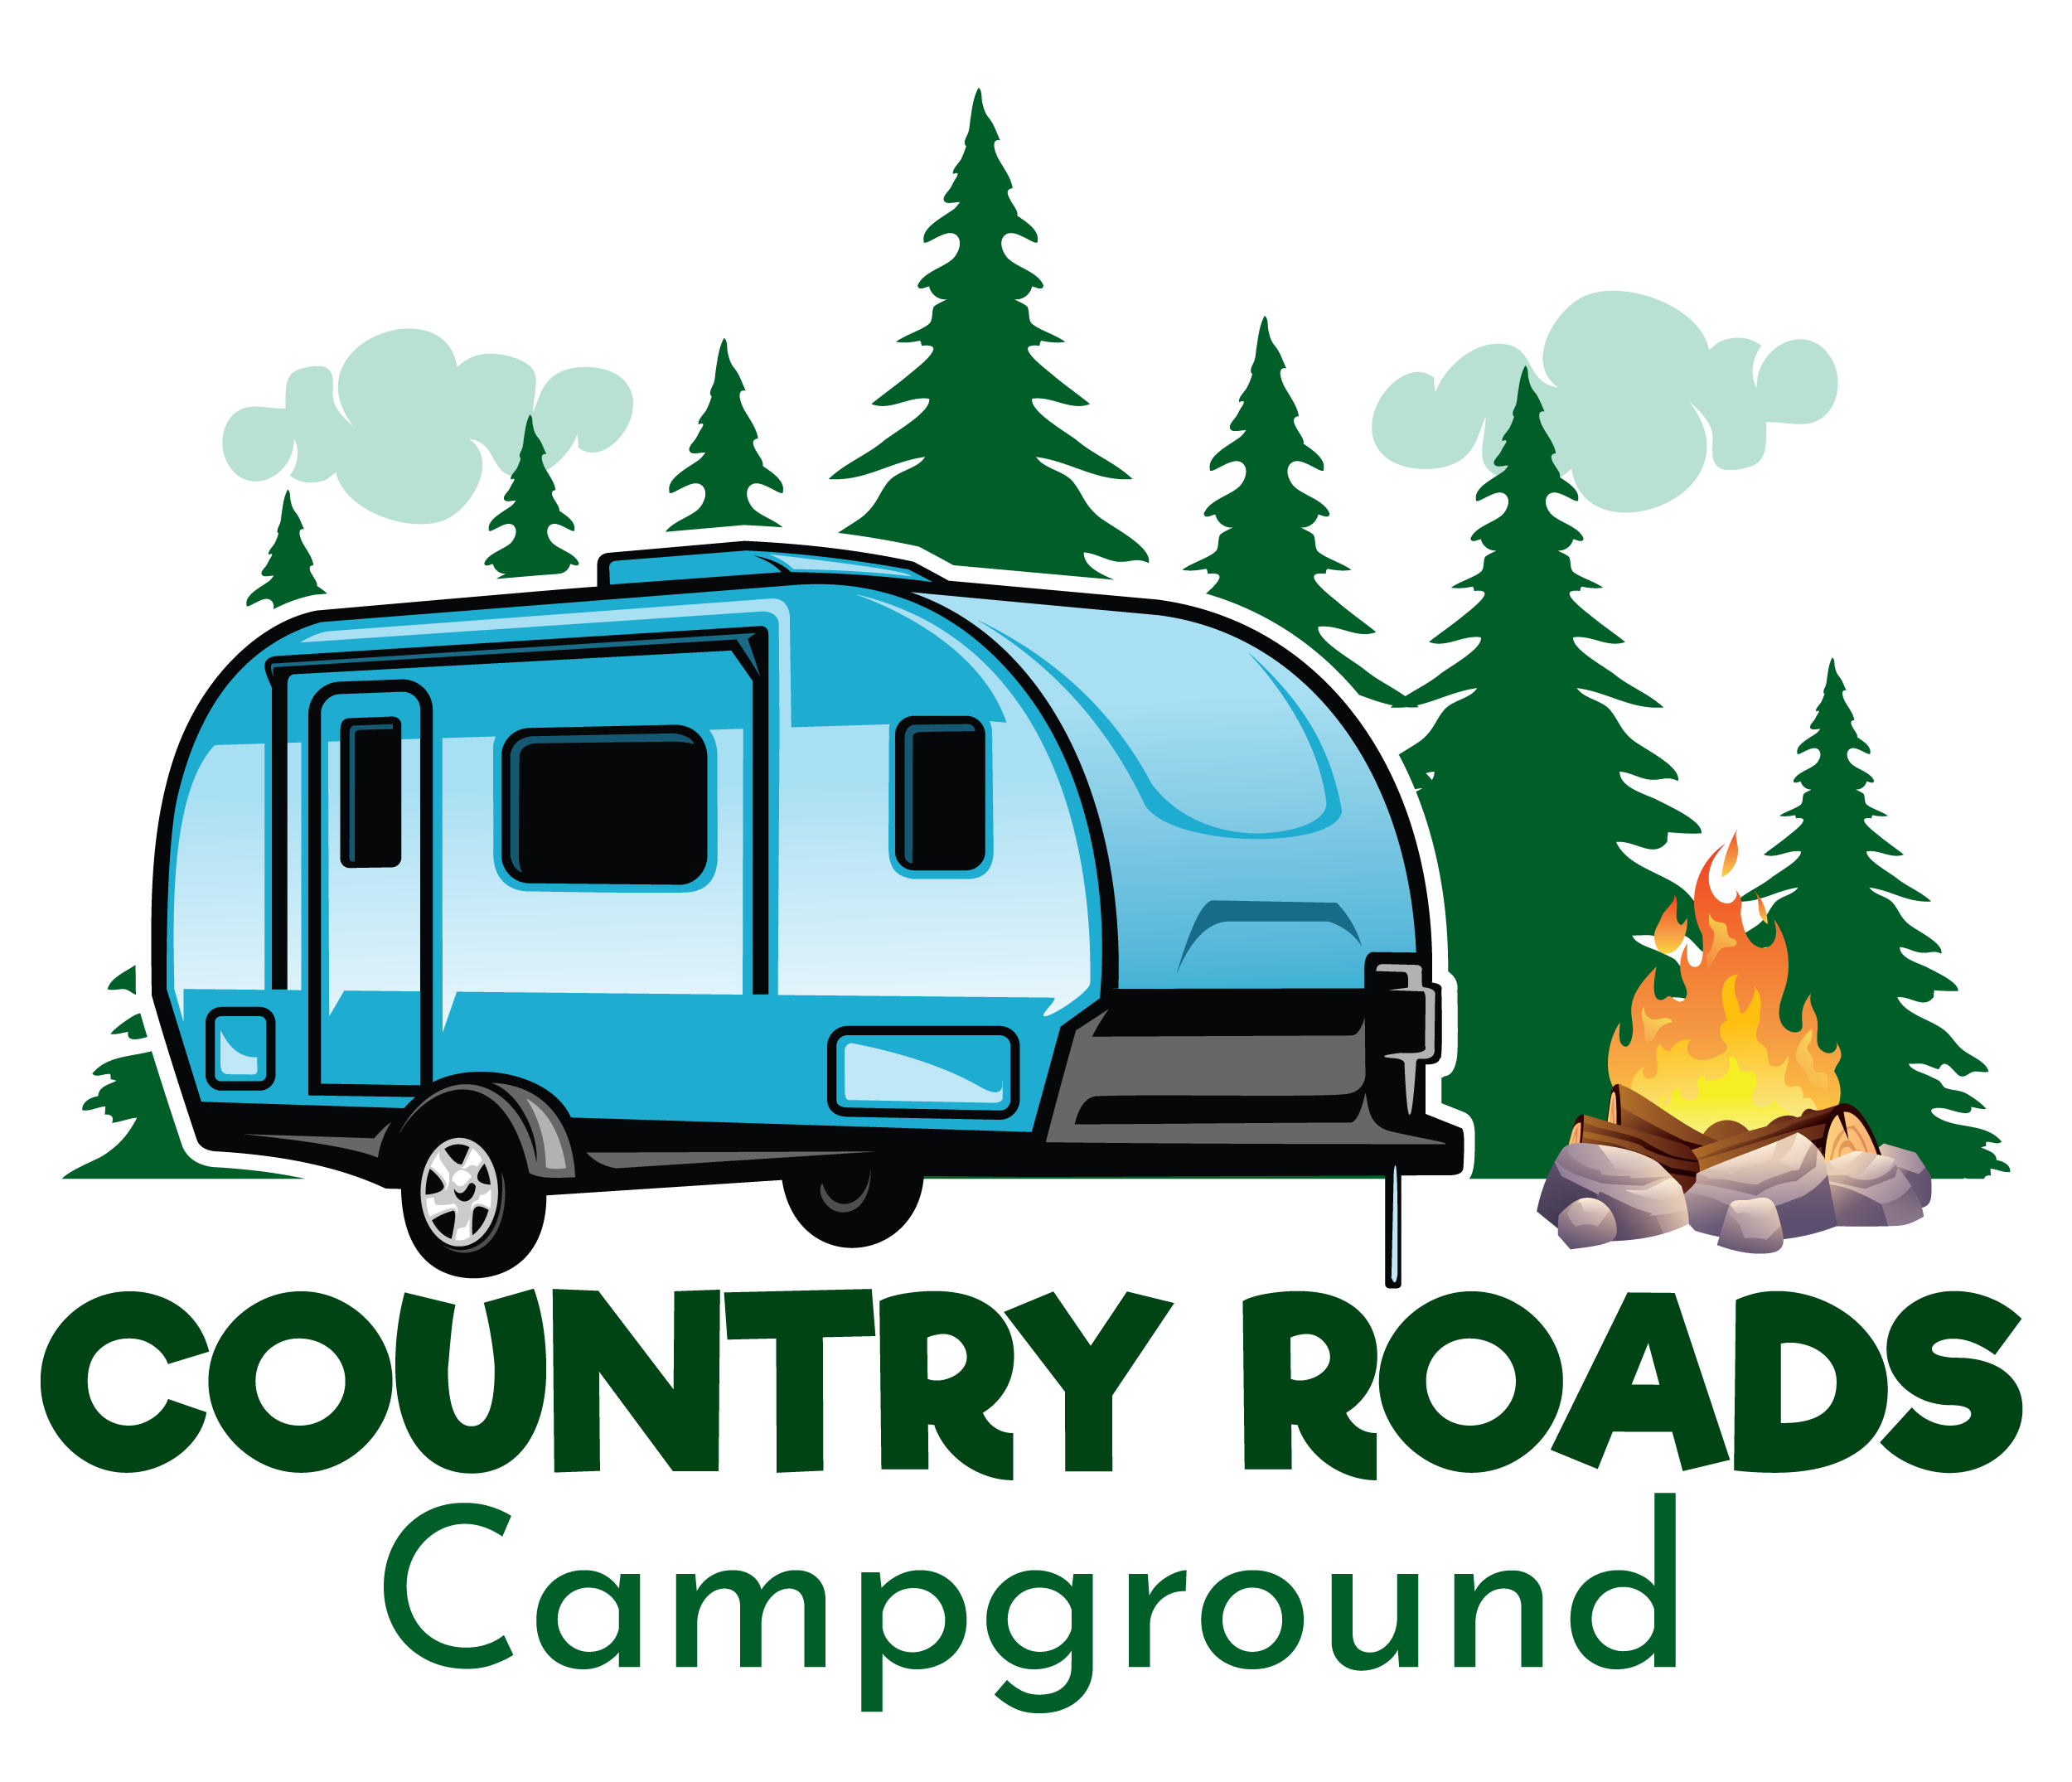 Country Roads Campground - Camping in the New York Catskill Mountains